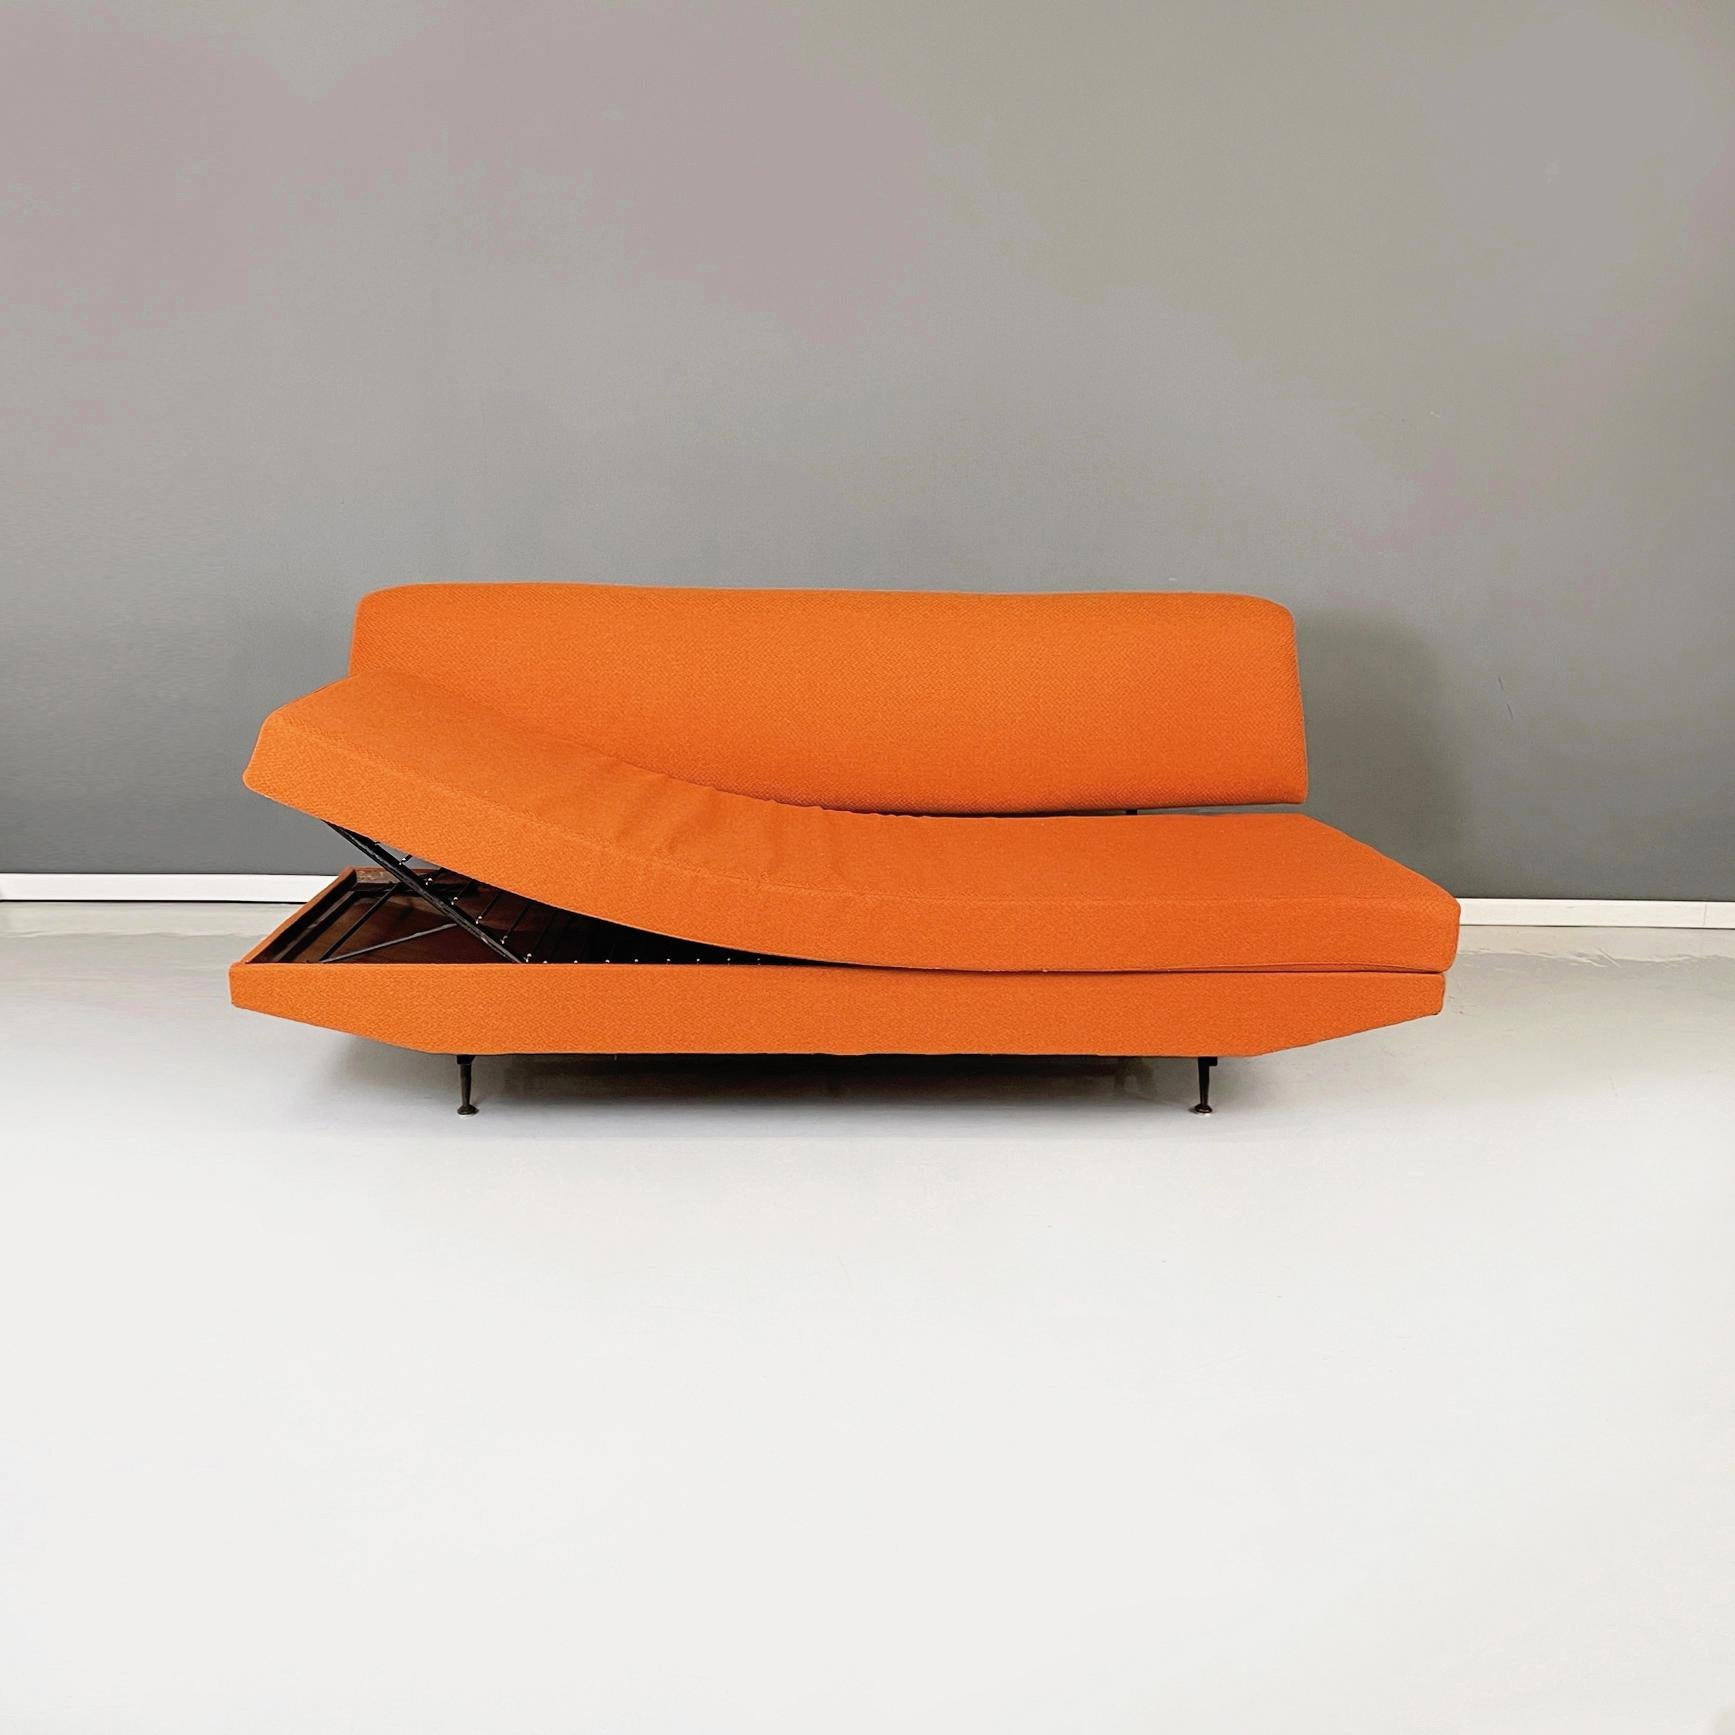 Mid-20th Century Italian Mid-Century Modern Sofa and Bed in orange Fabric and Black Metal, 1960s